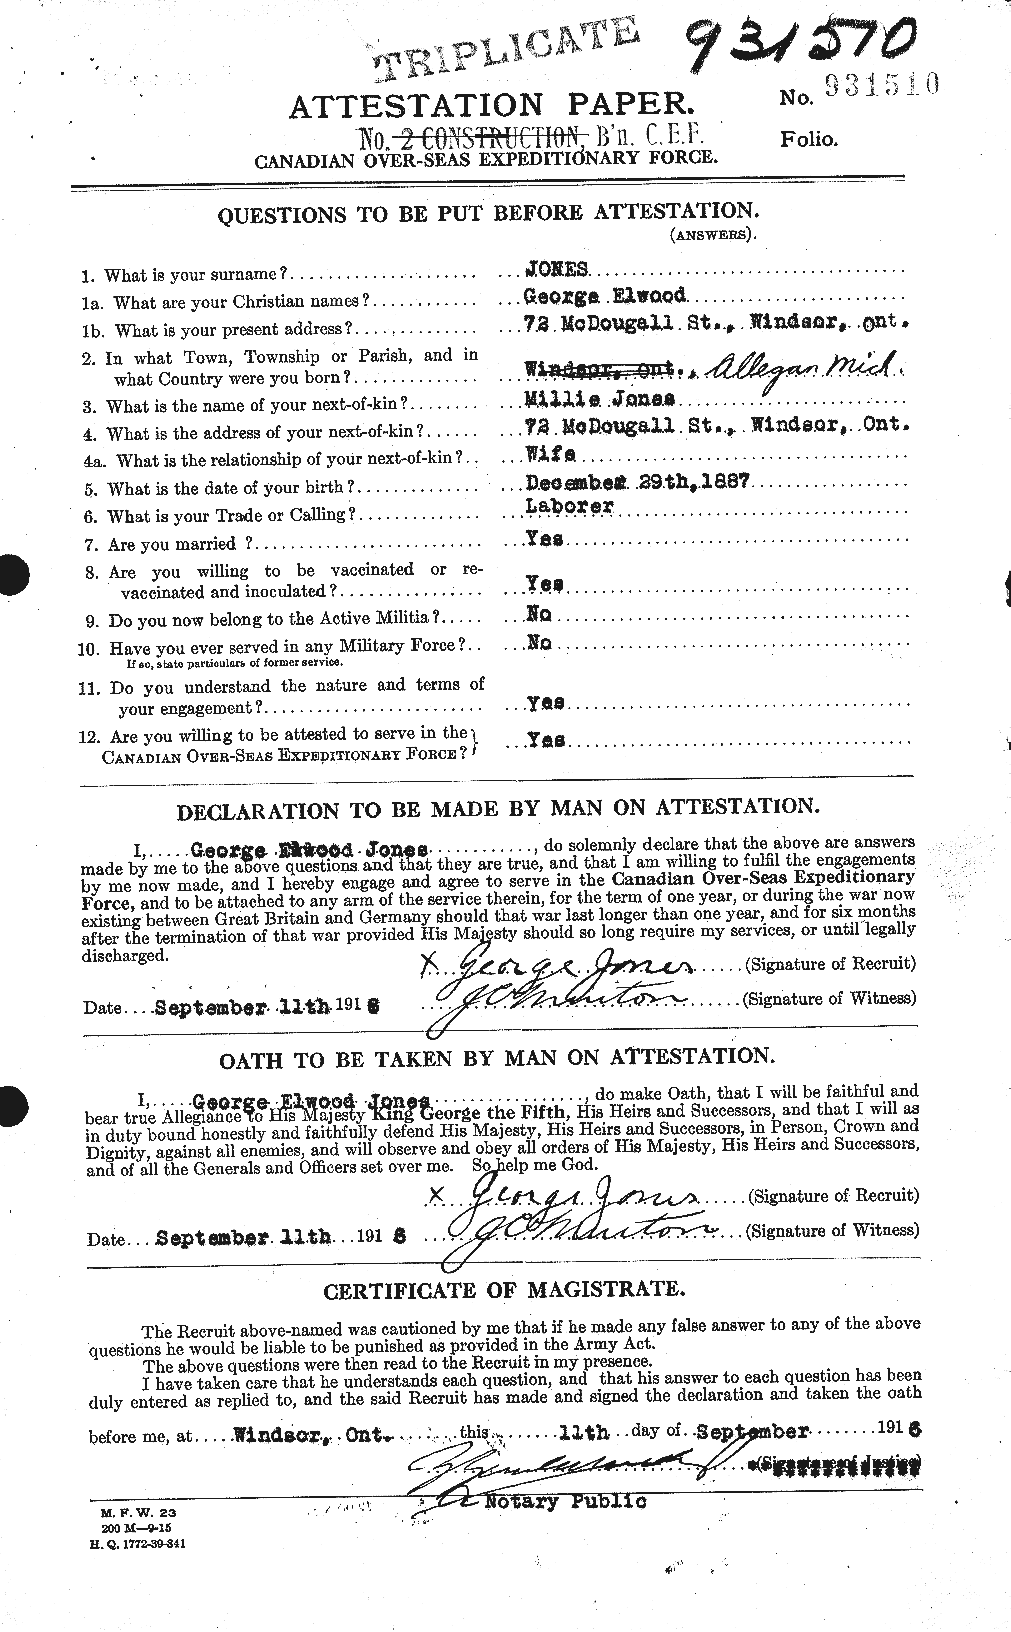 Personnel Records of the First World War - CEF 425234a